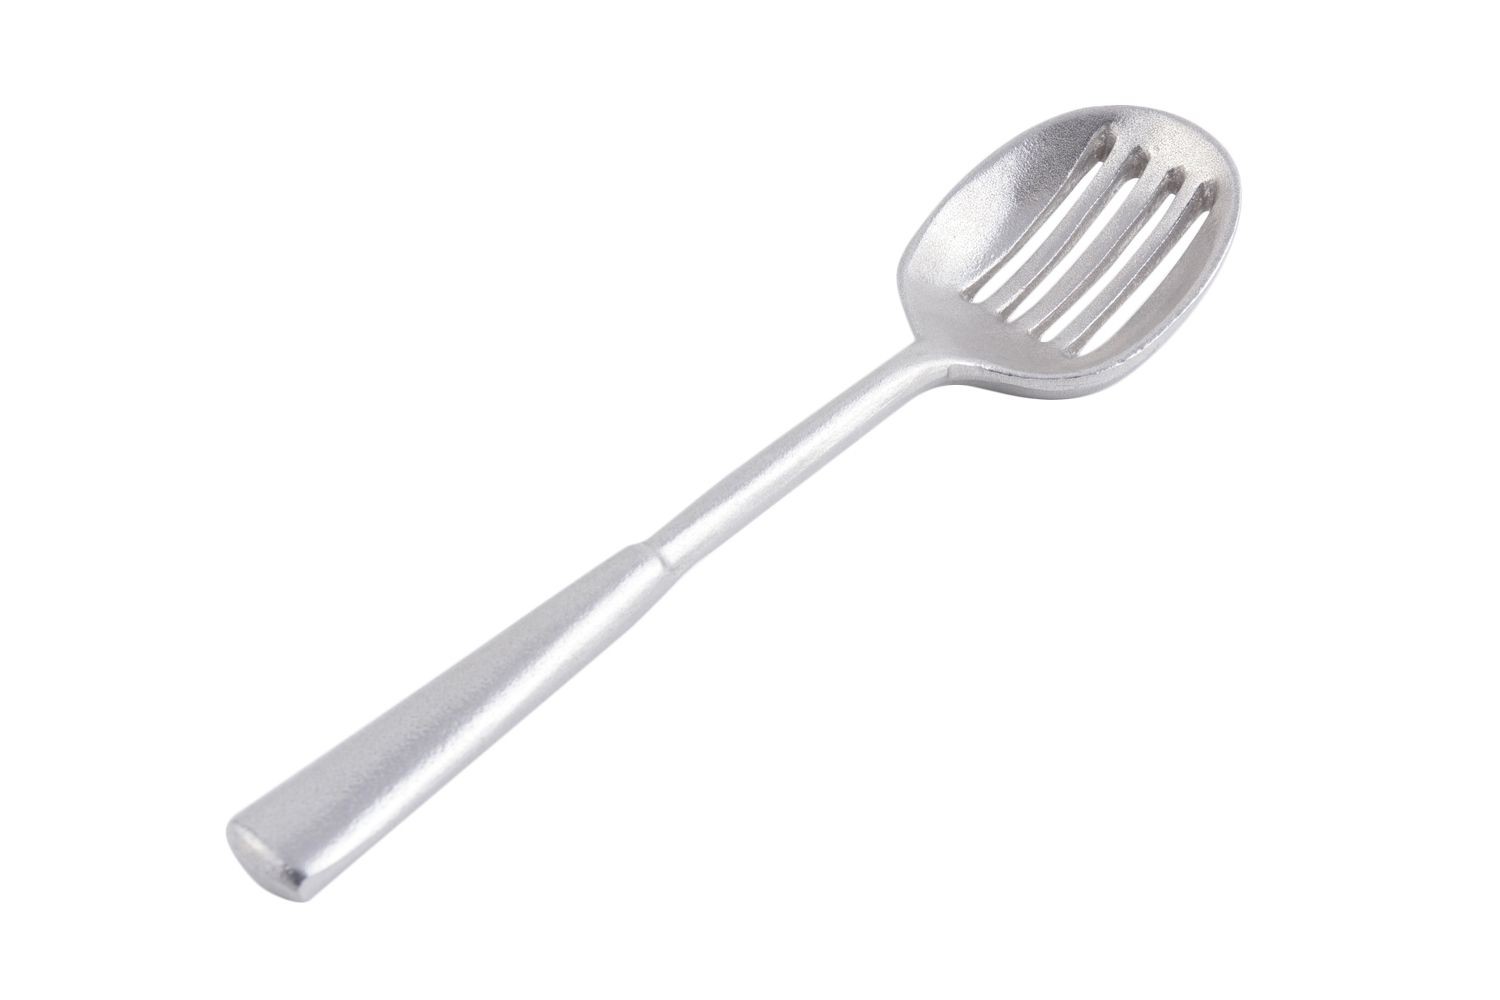 Bon Chef 9065P Slotted Spoon, Pewter Glo 10 3/4", Set of 6